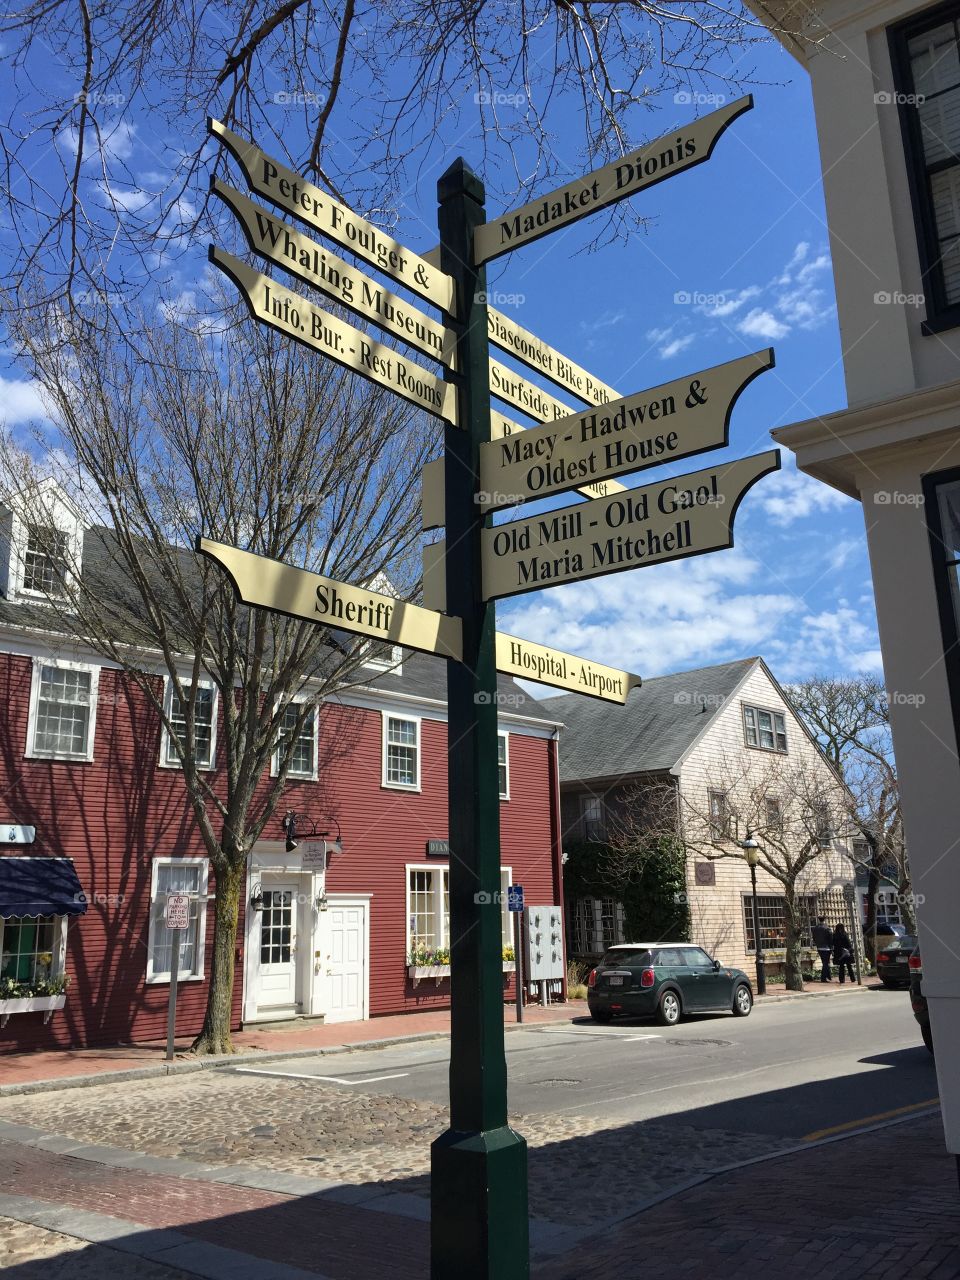 Old street sign in Nantucket